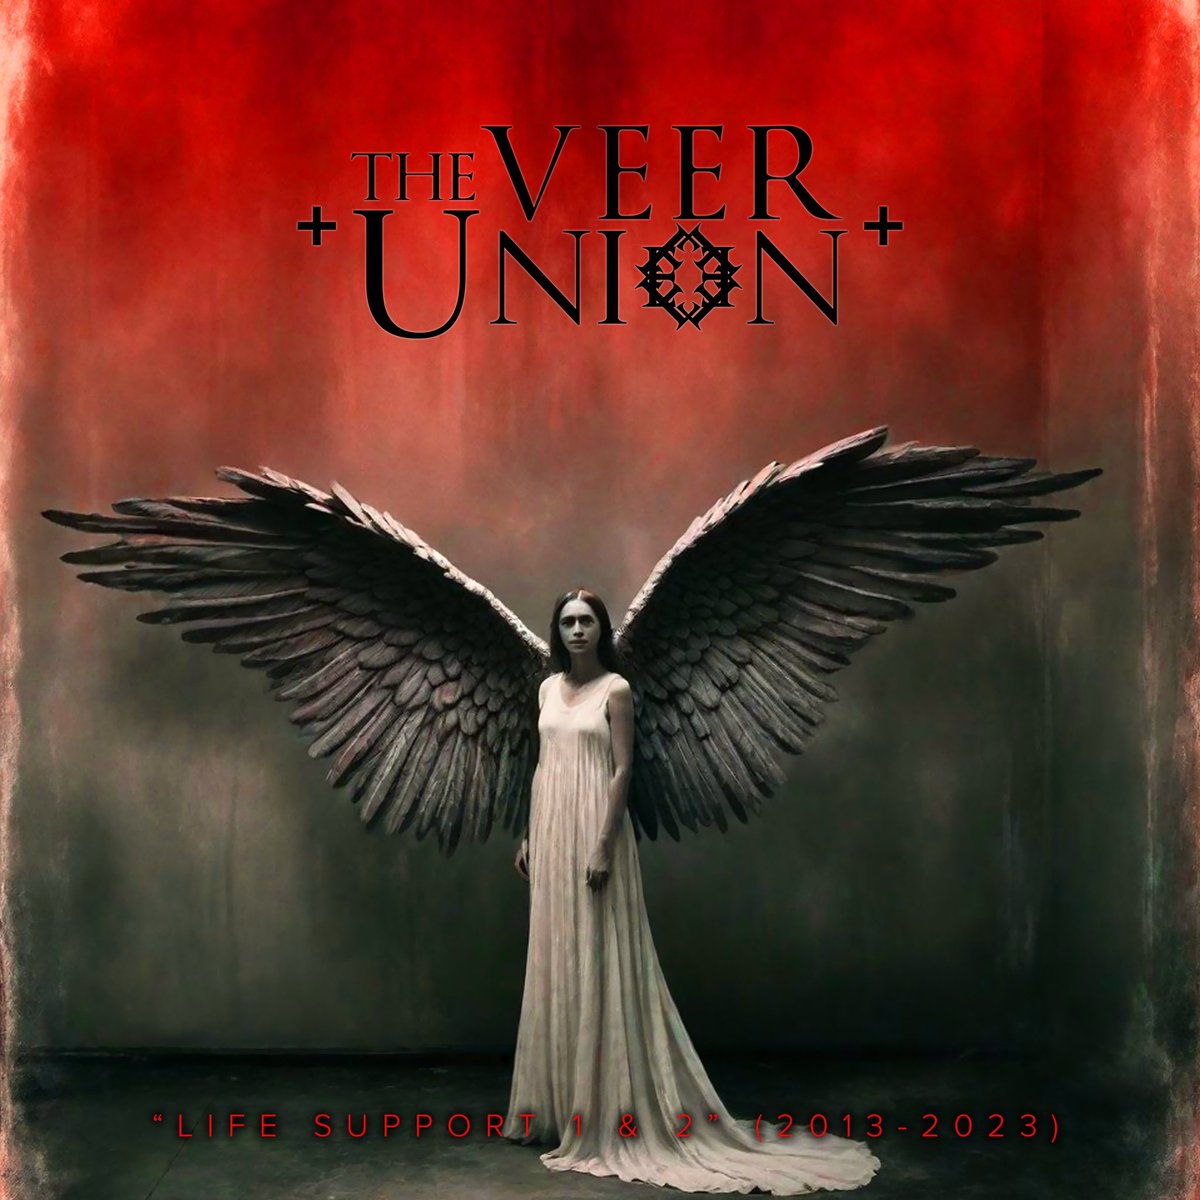 Our NEW ALBUM “Life Support 1 & 2 (2013-2023)” is OUT NOW! LINK IN BIO🤘🏿🤘🏻🤘🏽 . . . #theveerunion #lifesupport #alternativemetal #newalbum #newmusicfriday